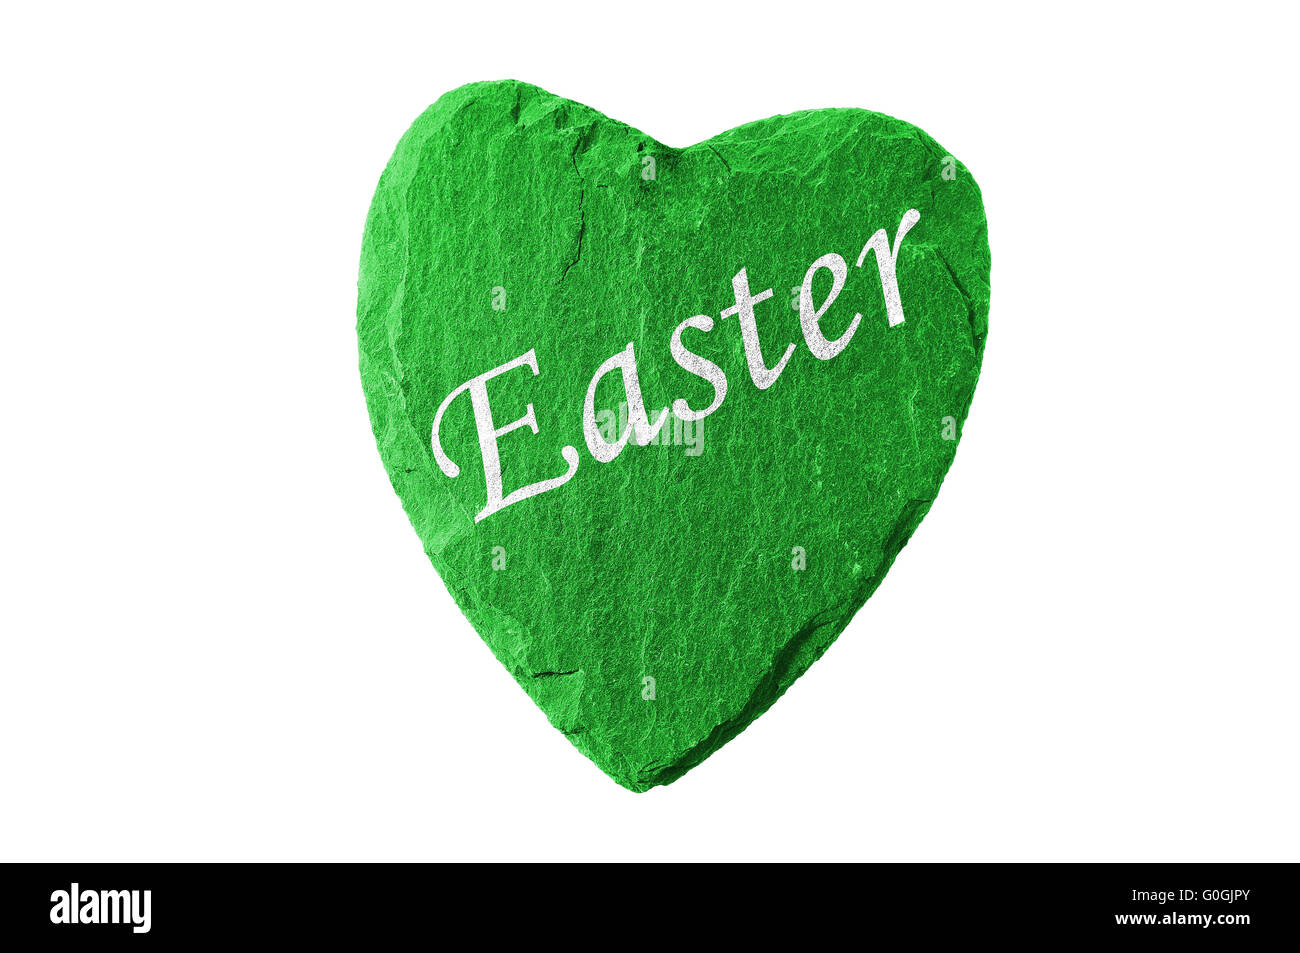 happy easter writing on a green heart Stock Photo